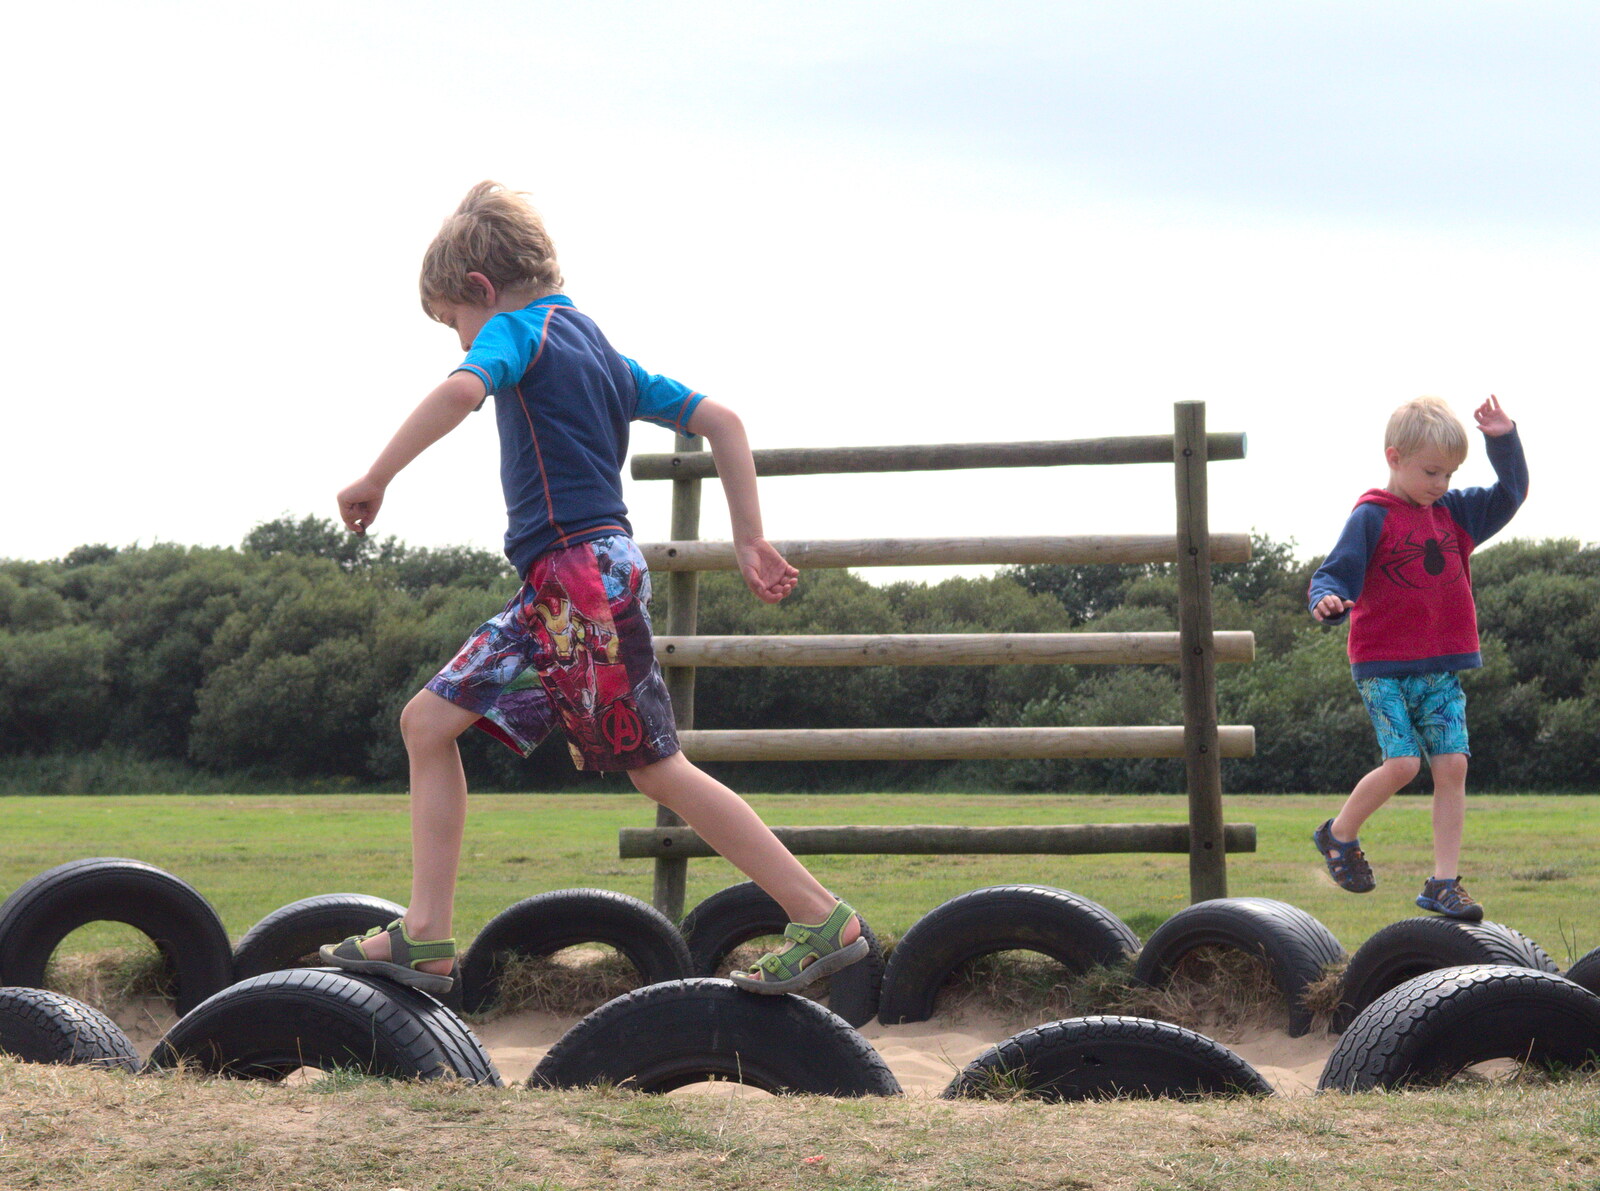 The boys run around the tyre ring from A Trip to Waxham Sands,  Horsey, Norfolk - 27th August 2016